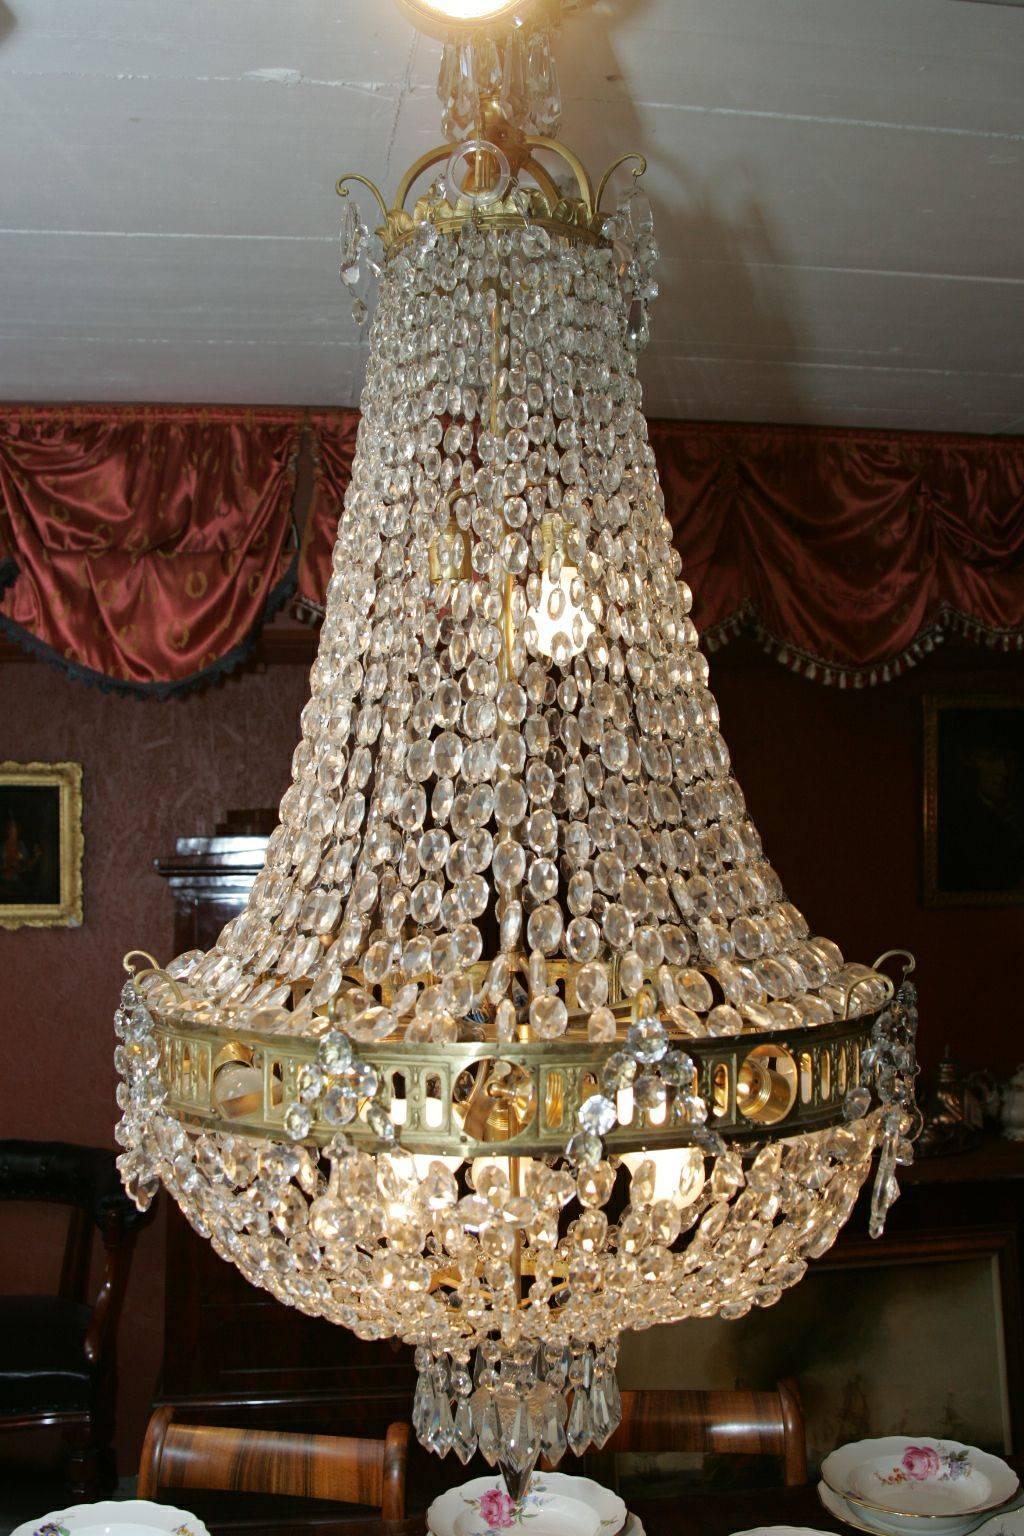 Monumental antique basket chandelier Biedermeier style, circa 1890-1900
Finely chiselled bronze. Basket-shaped body made of hand-wired bead cords. In the course of leaf rosette and final pine knob. Connected by broad, ornamental and perforated